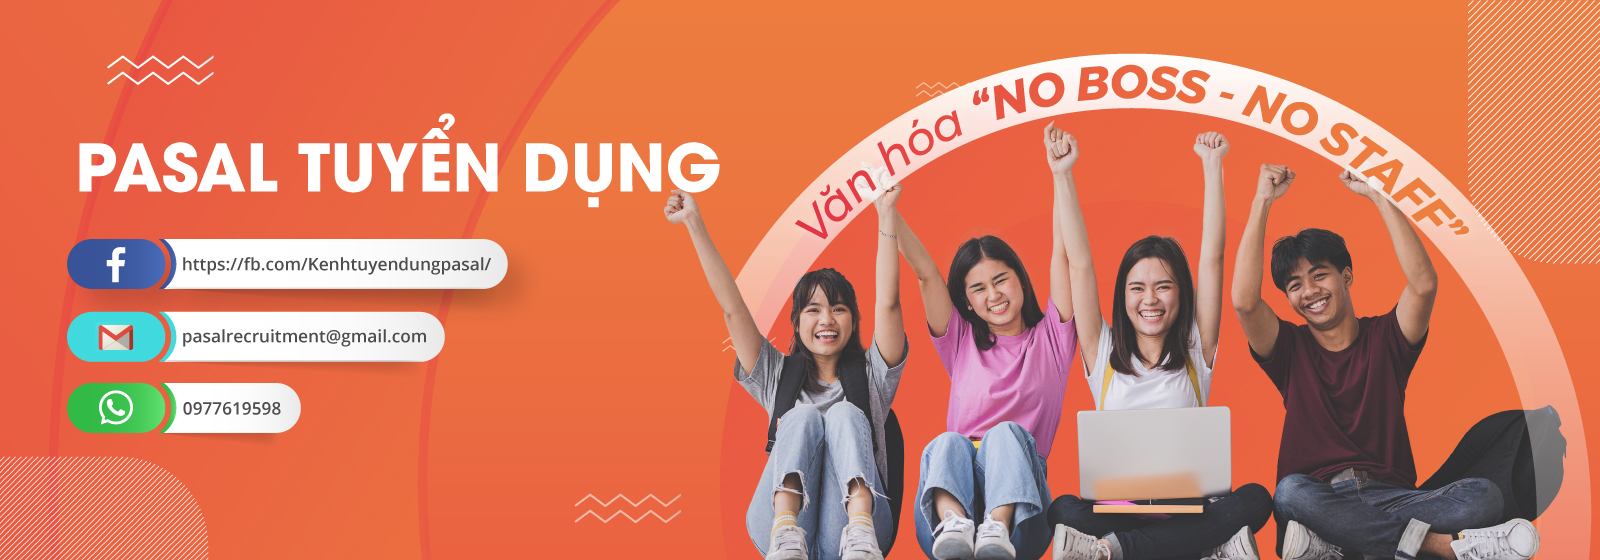 Banner Top - Tuyển Dụng